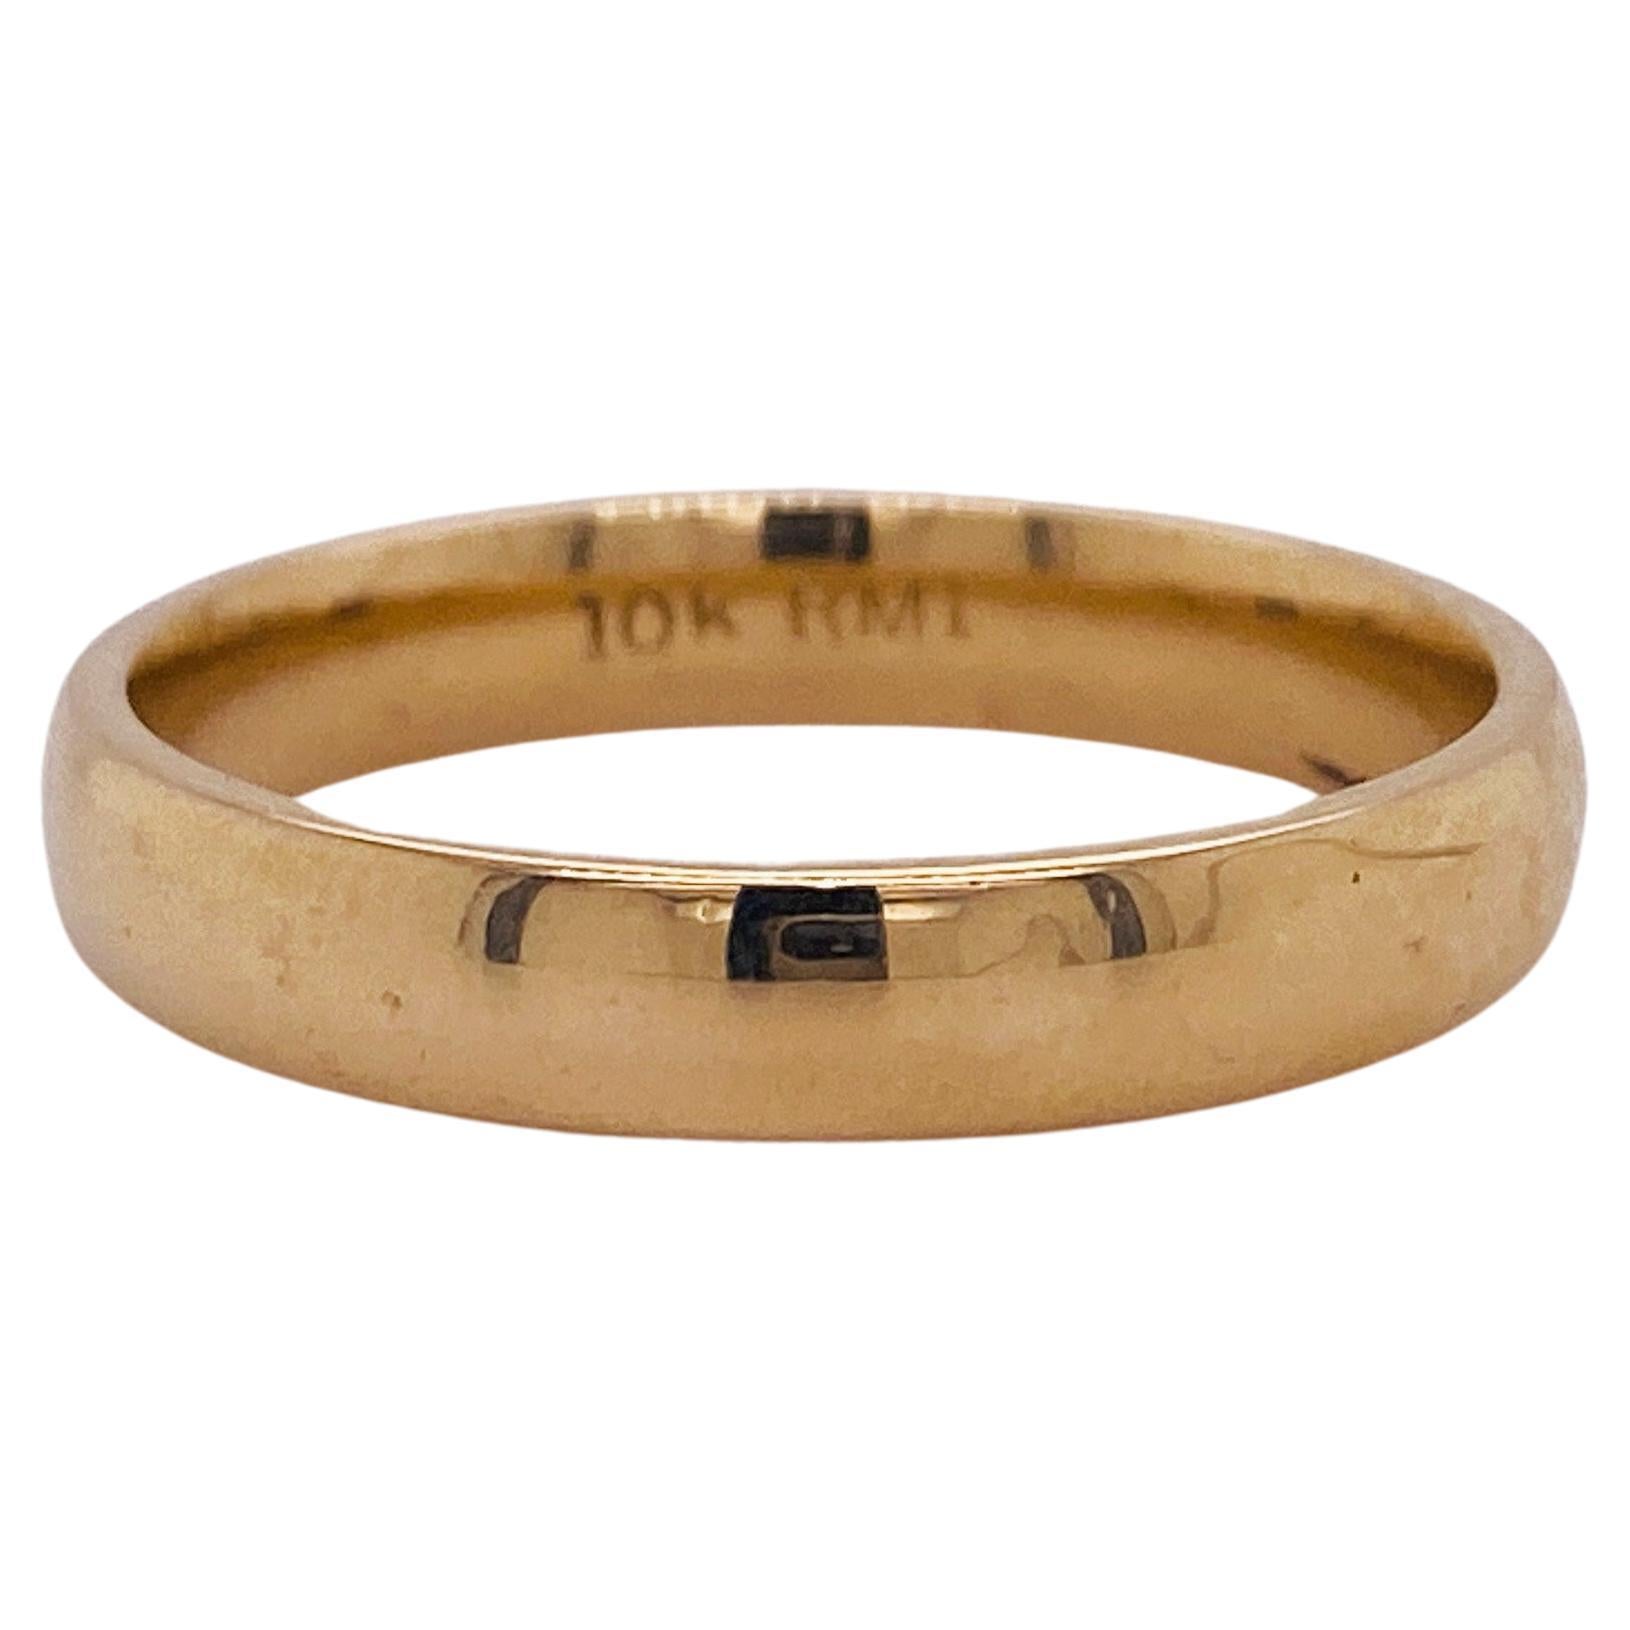 Five Star Jewelry - Domed Wedding Band Comfort Fit 10K LV American Contemporary Yellow Gold